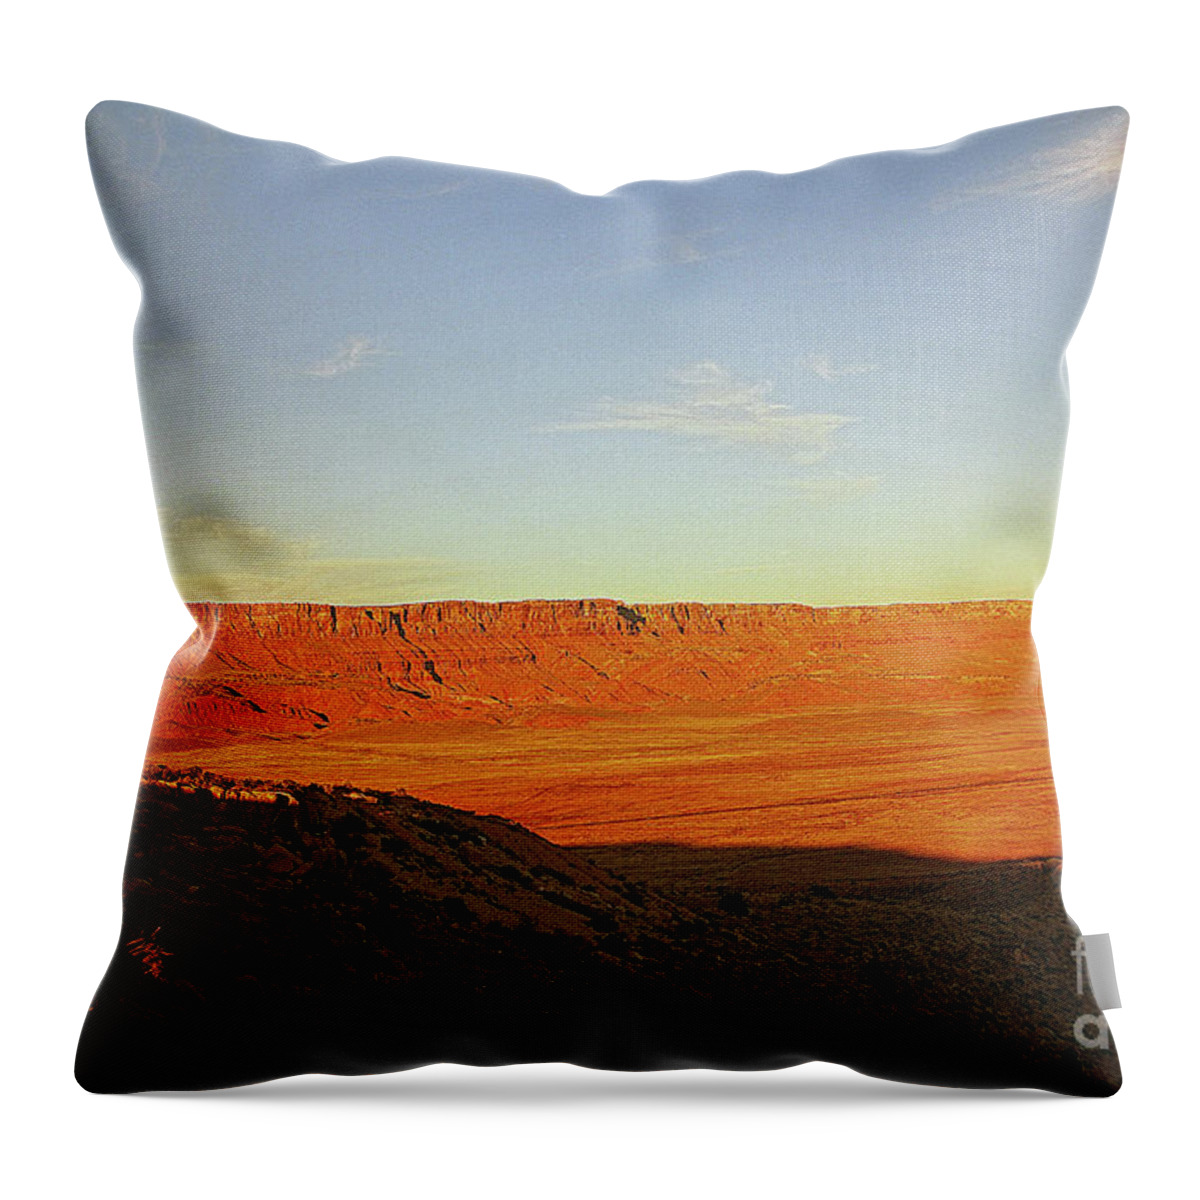 Sunset Throw Pillow featuring the photograph Sunset by Mark Jackson